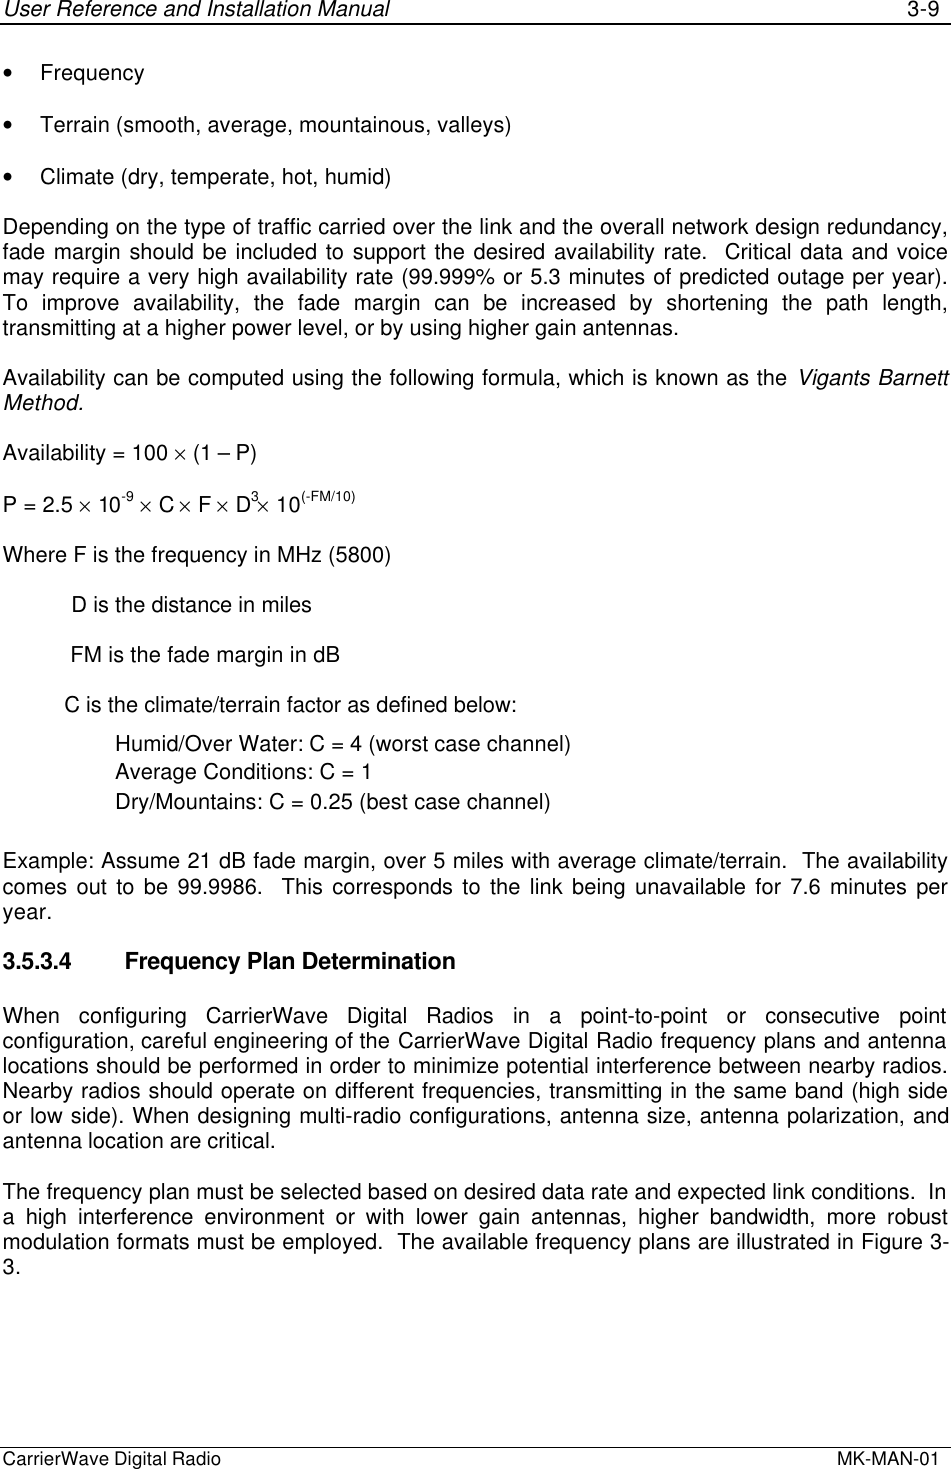 User Reference and Installation Manual 3-9CarrierWave Digital Radio  MK-MAN-01• Frequency• Terrain (smooth, average, mountainous, valleys)• Climate (dry, temperate, hot, humid)Depending on the type of traffic carried over the link and the overall network design redundancy,fade margin should be included to support the desired availability rate.  Critical data and voicemay require a very high availability rate (99.999% or 5.3 minutes of predicted outage per year).To improve availability, the fade margin can be increased by shortening the path length,transmitting at a higher power level, or by using higher gain antennas.Availability can be computed using the following formula, which is known as the Vigants BarnettMethod.Availability = 100 × (1 – P)P = 2.5 × 10-9 × C × F × D3× 10(-FM/10)Where F is the frequency in MHz (5800)           D is the distance in miles           FM is the fade margin in dB          C is the climate/terrain factor as defined below:Humid/Over Water: C = 4 (worst case channel)Average Conditions: C = 1Dry/Mountains: C = 0.25 (best case channel)Example: Assume 21 dB fade margin, over 5 miles with average climate/terrain.  The availabilitycomes out to be 99.9986.  This corresponds to the link being unavailable for 7.6 minutes peryear.3.5.3.4 Frequency Plan DeterminationWhen configuring CarrierWave Digital Radios in a point-to-point or consecutive pointconfiguration, careful engineering of the CarrierWave Digital Radio frequency plans and antennalocations should be performed in order to minimize potential interference between nearby radios.Nearby radios should operate on different frequencies, transmitting in the same band (high sideor low side). When designing multi-radio configurations, antenna size, antenna polarization, andantenna location are critical.The frequency plan must be selected based on desired data rate and expected link conditions.  Ina high interference environment or with lower gain antennas, higher bandwidth, more robustmodulation formats must be employed.  The available frequency plans are illustrated in Figure 3-3.